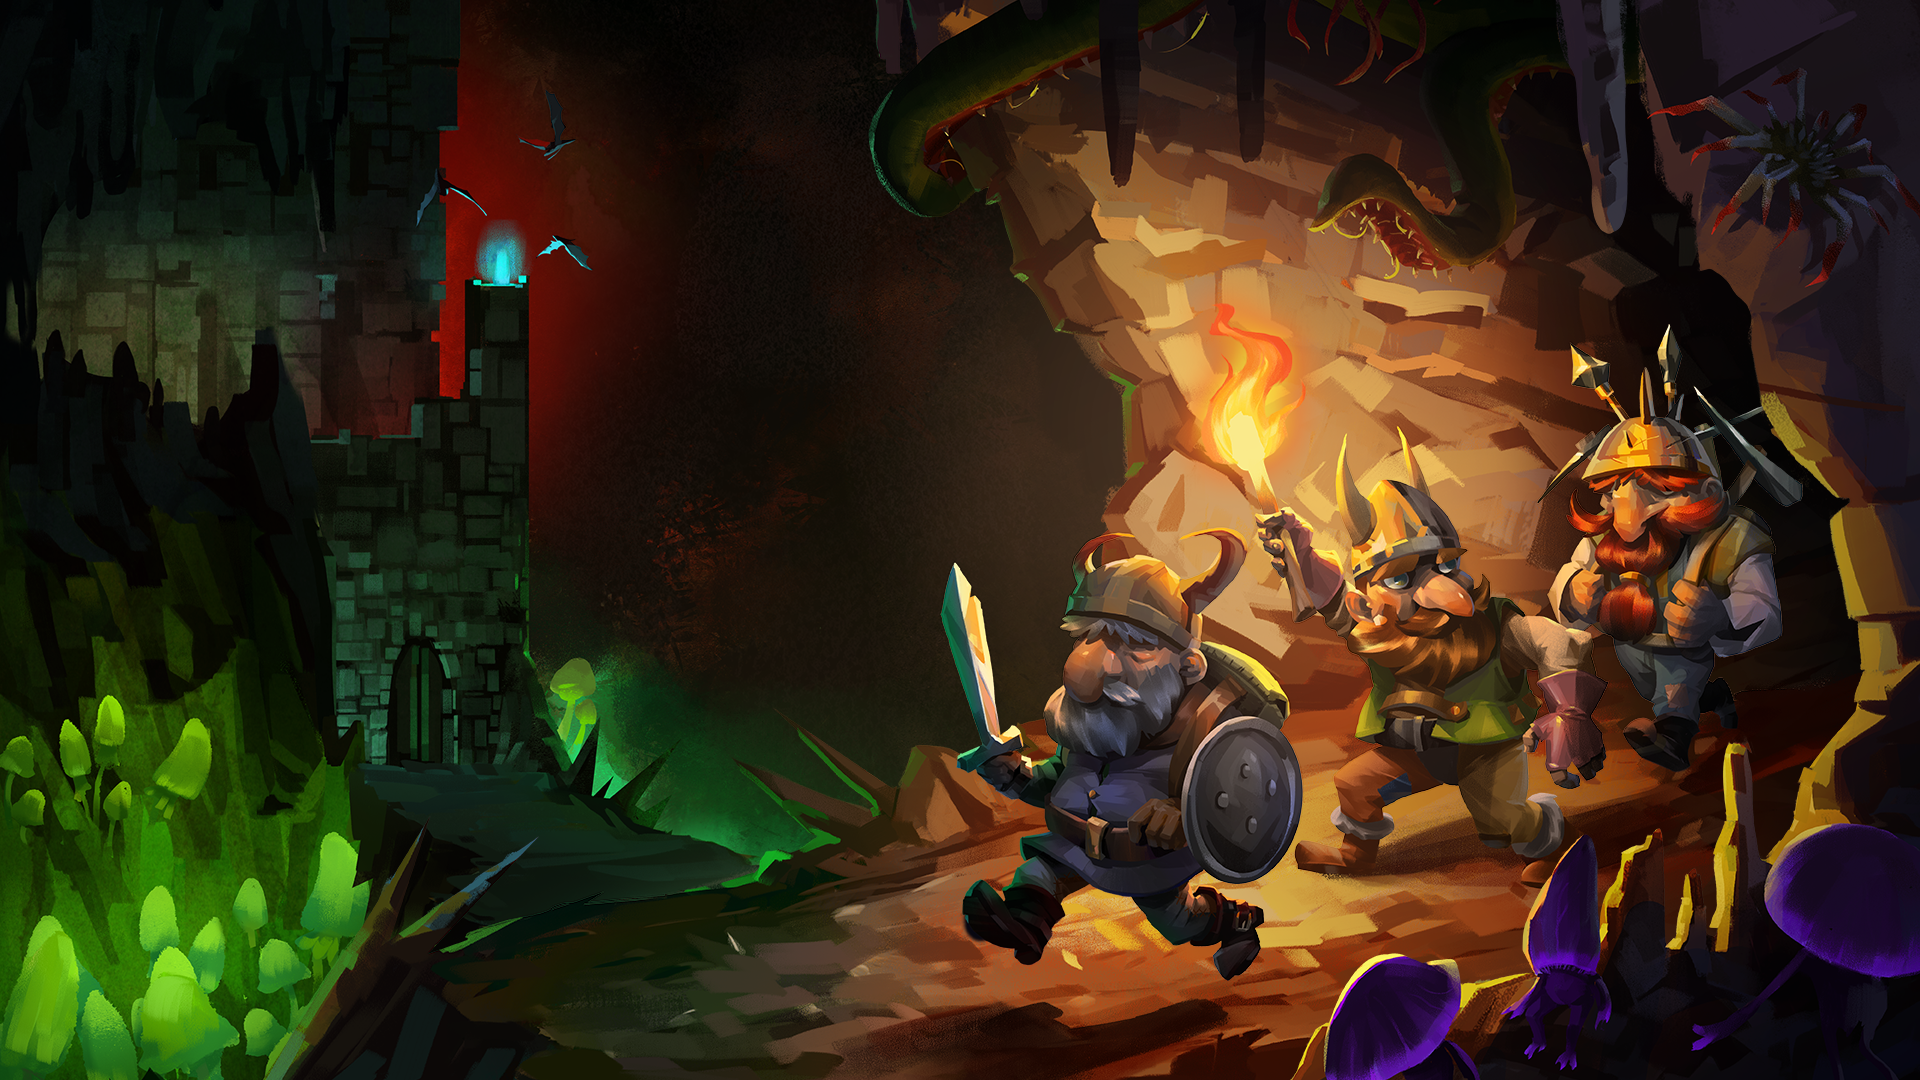 Three dwarves venture into a cave, wielding torches, swords, and mining equipment.